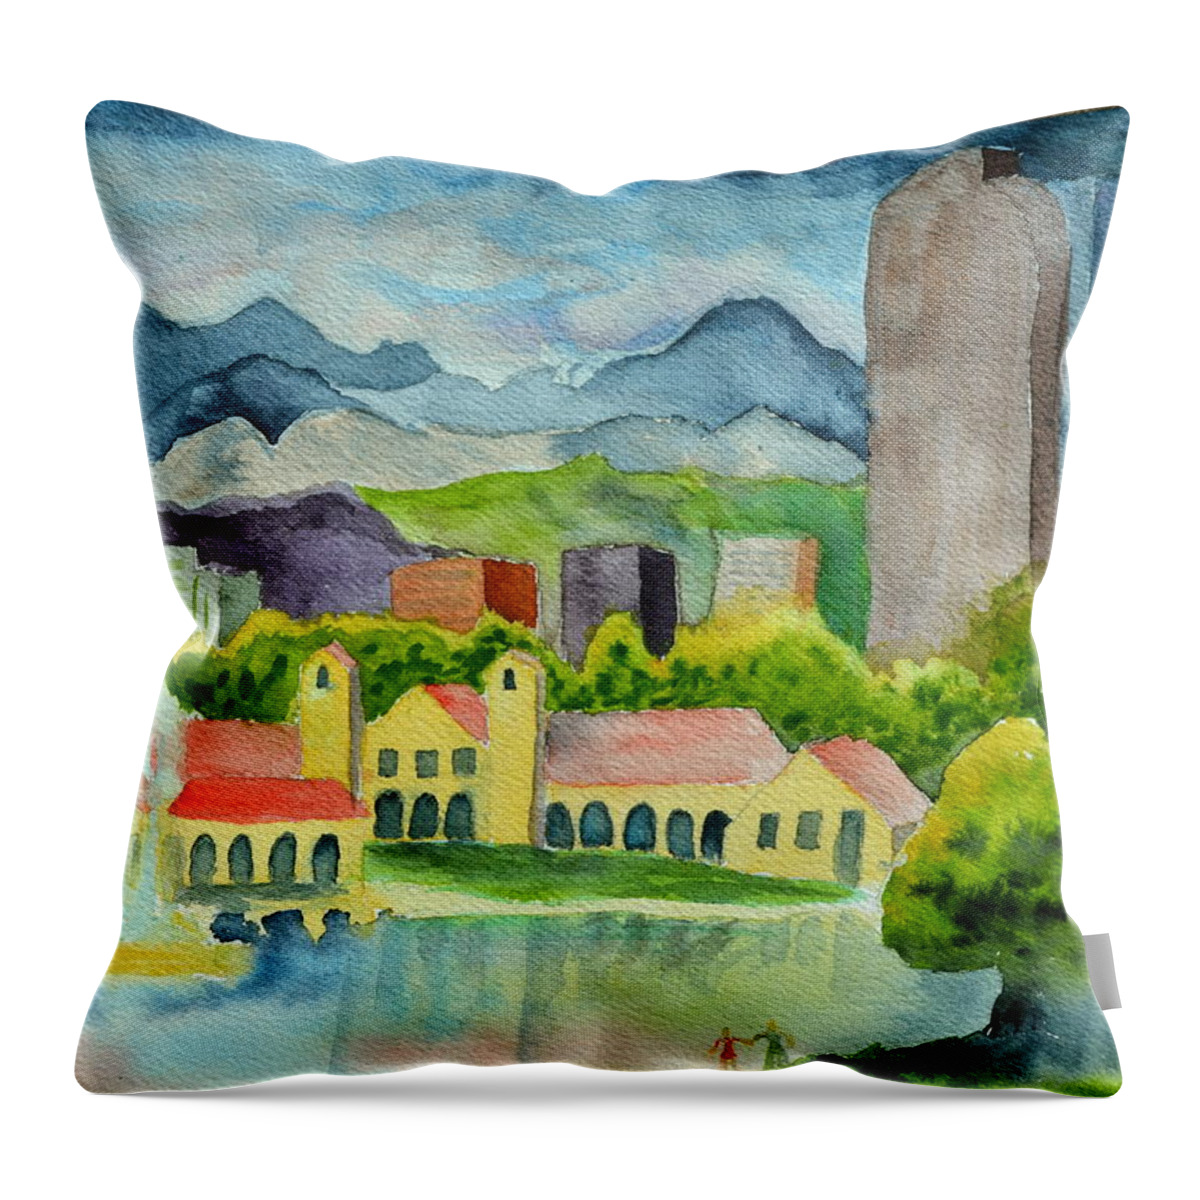 City Park Throw Pillow featuring the painting City Park Wonderland Summer by Beverley Harper Tinsley